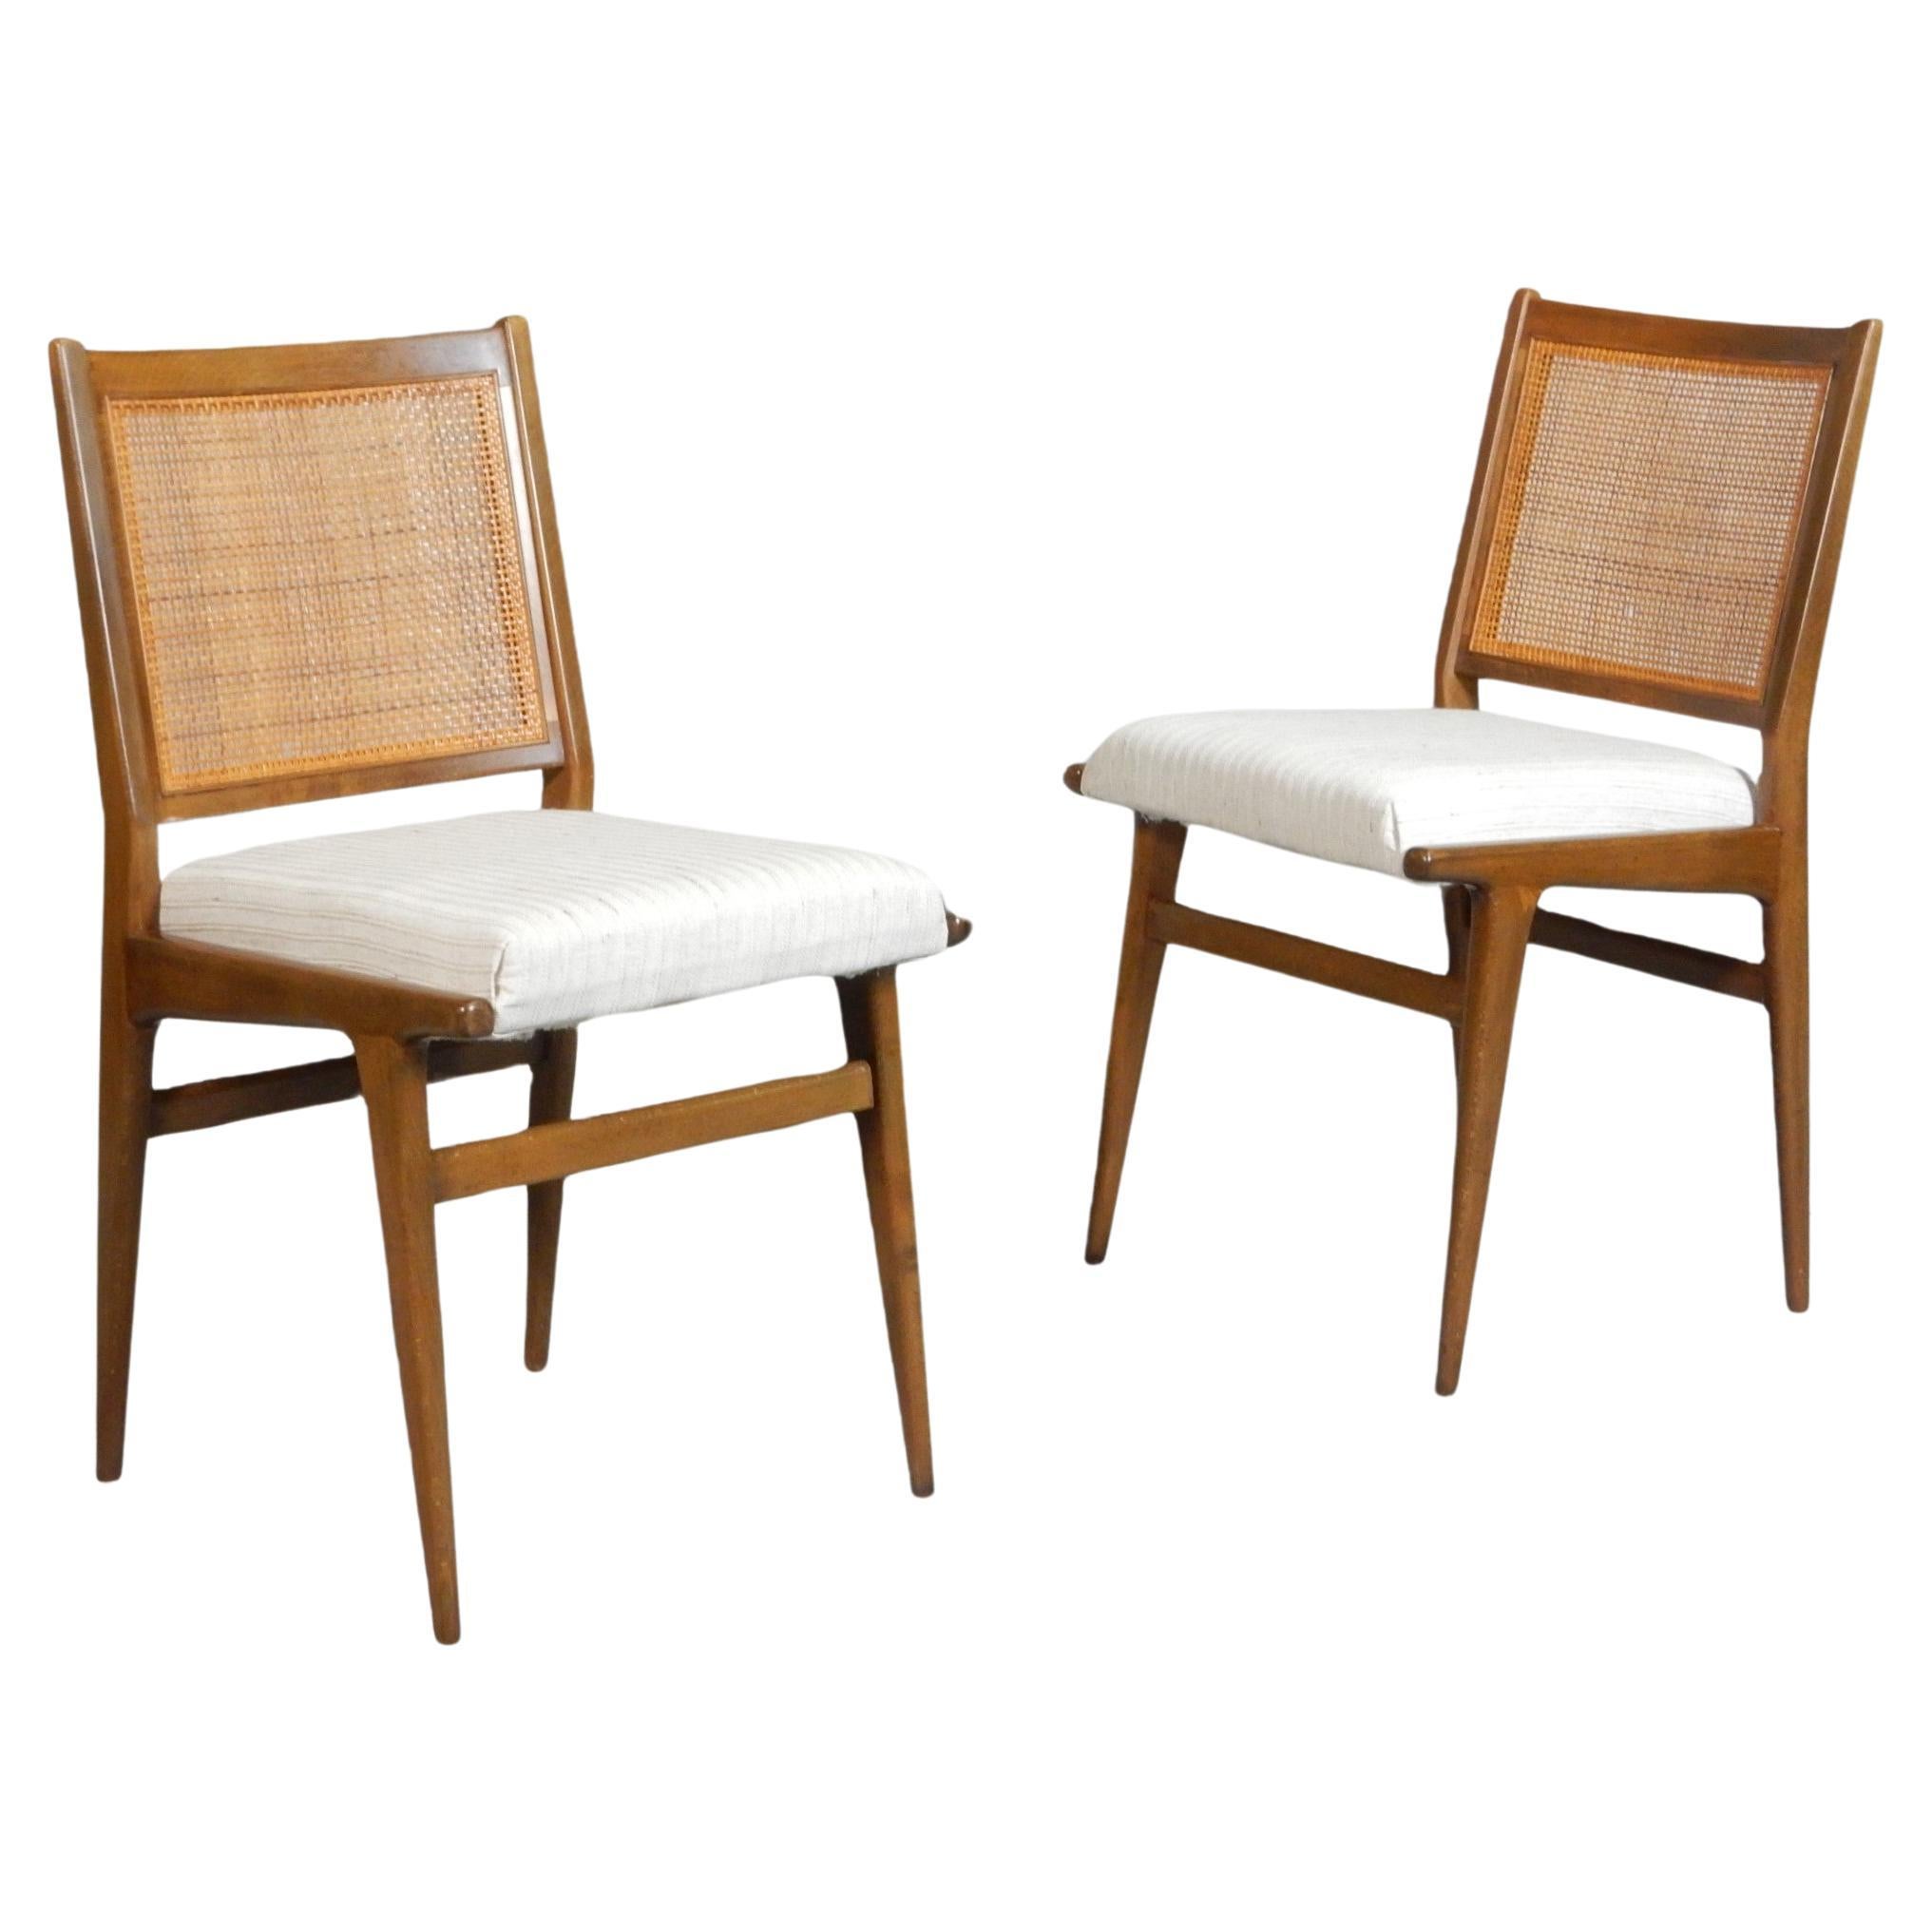 1950's Jens Risom design Cane Back Dining Chairs by J.O. Carlssons Möbelindustri